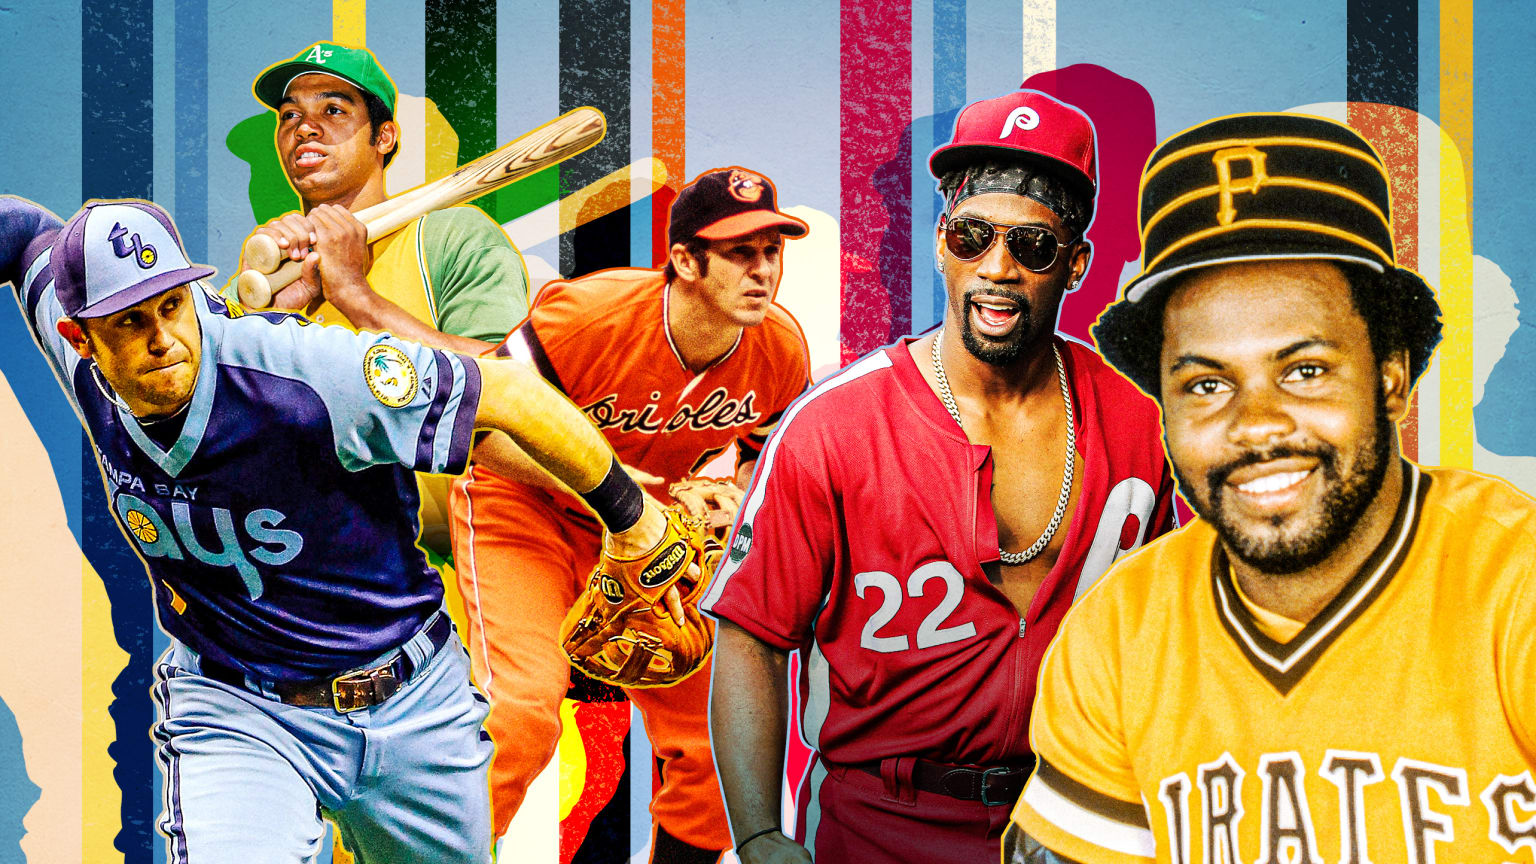 Five players are pictured wearing colorful uniforms